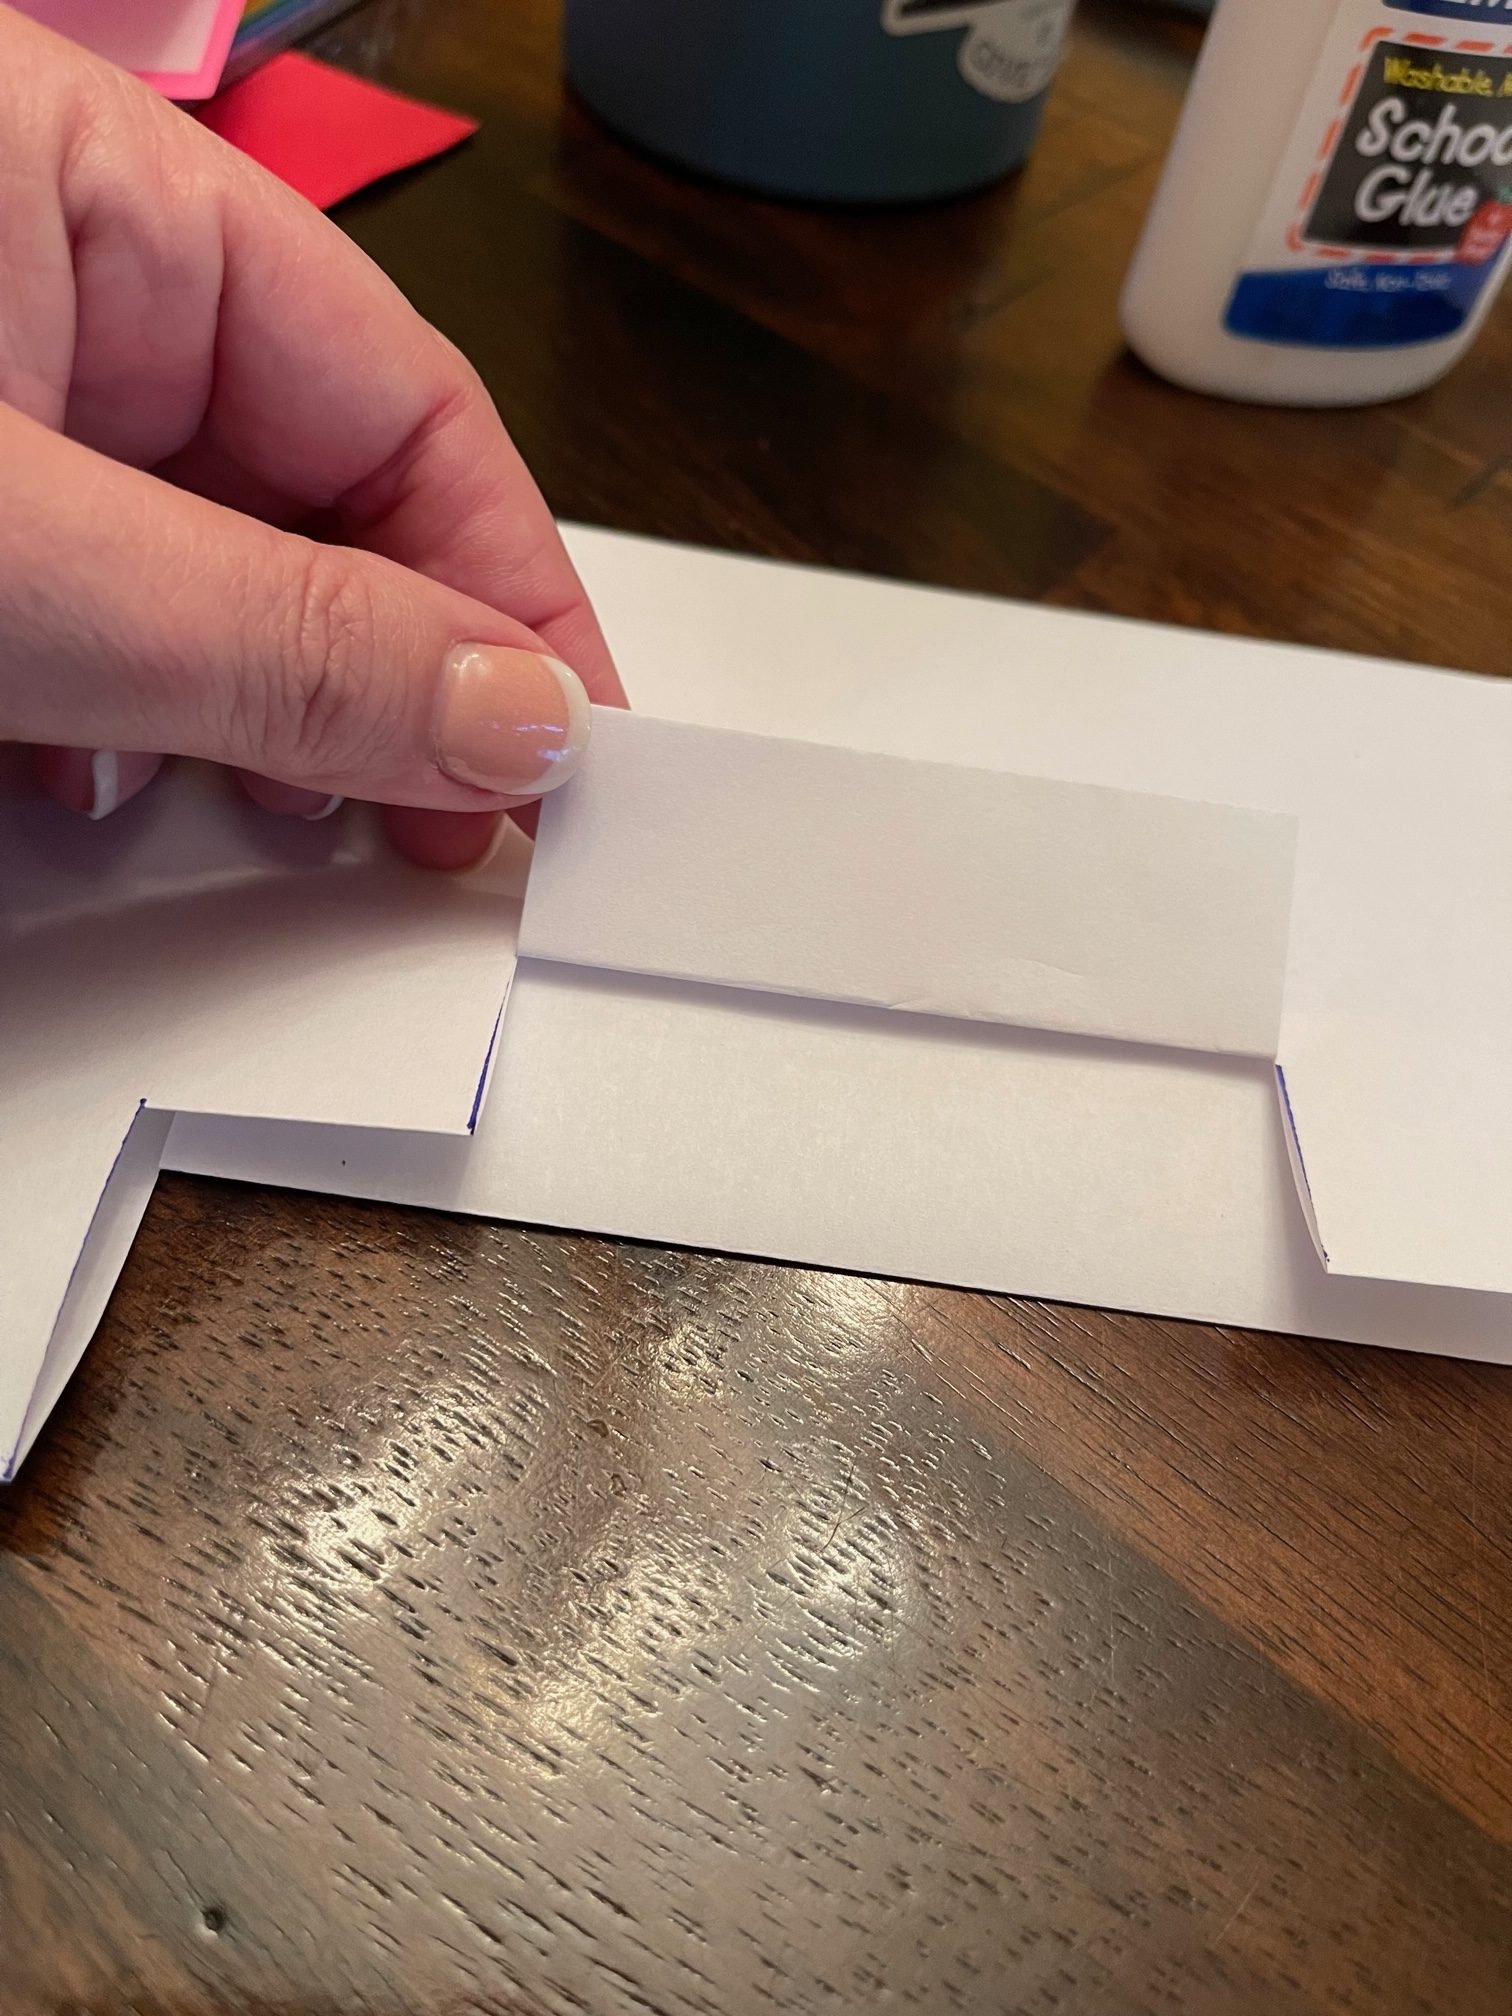 The second fold and cut of pop up